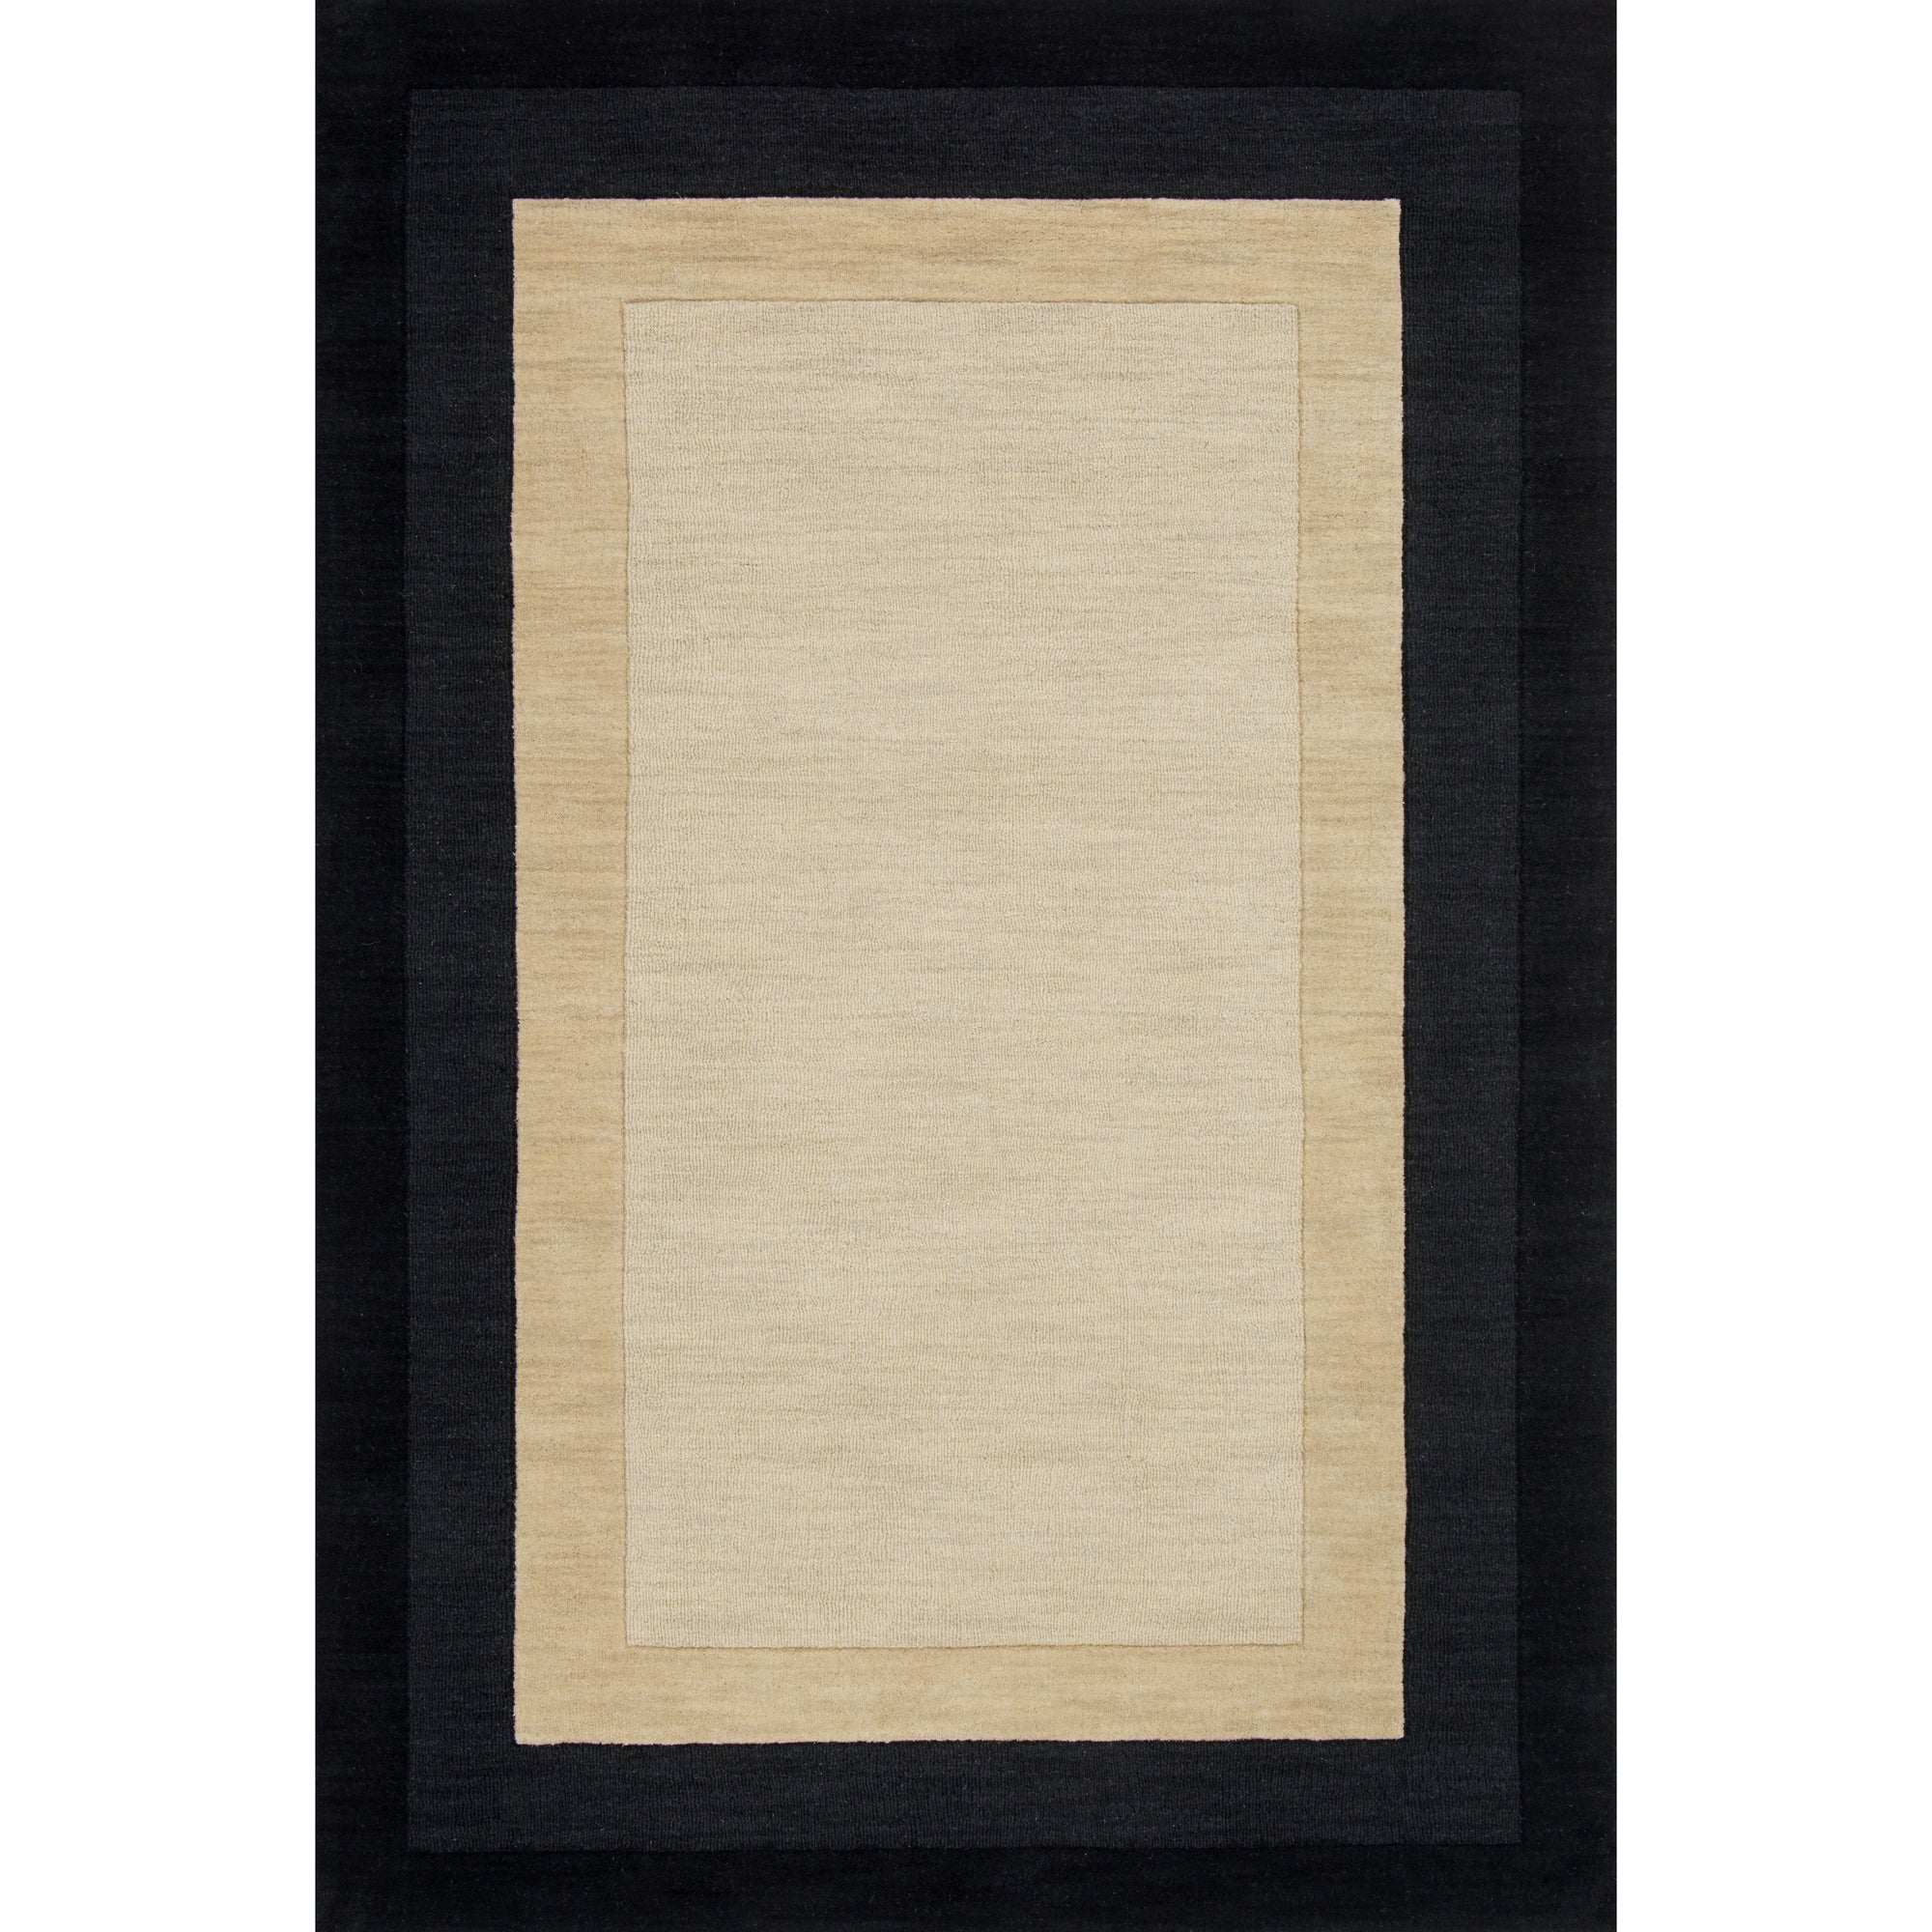 Rugs by Roo Loloi Hamilton Ivory Charcoal Area Rug in size 18" x 18" Sample